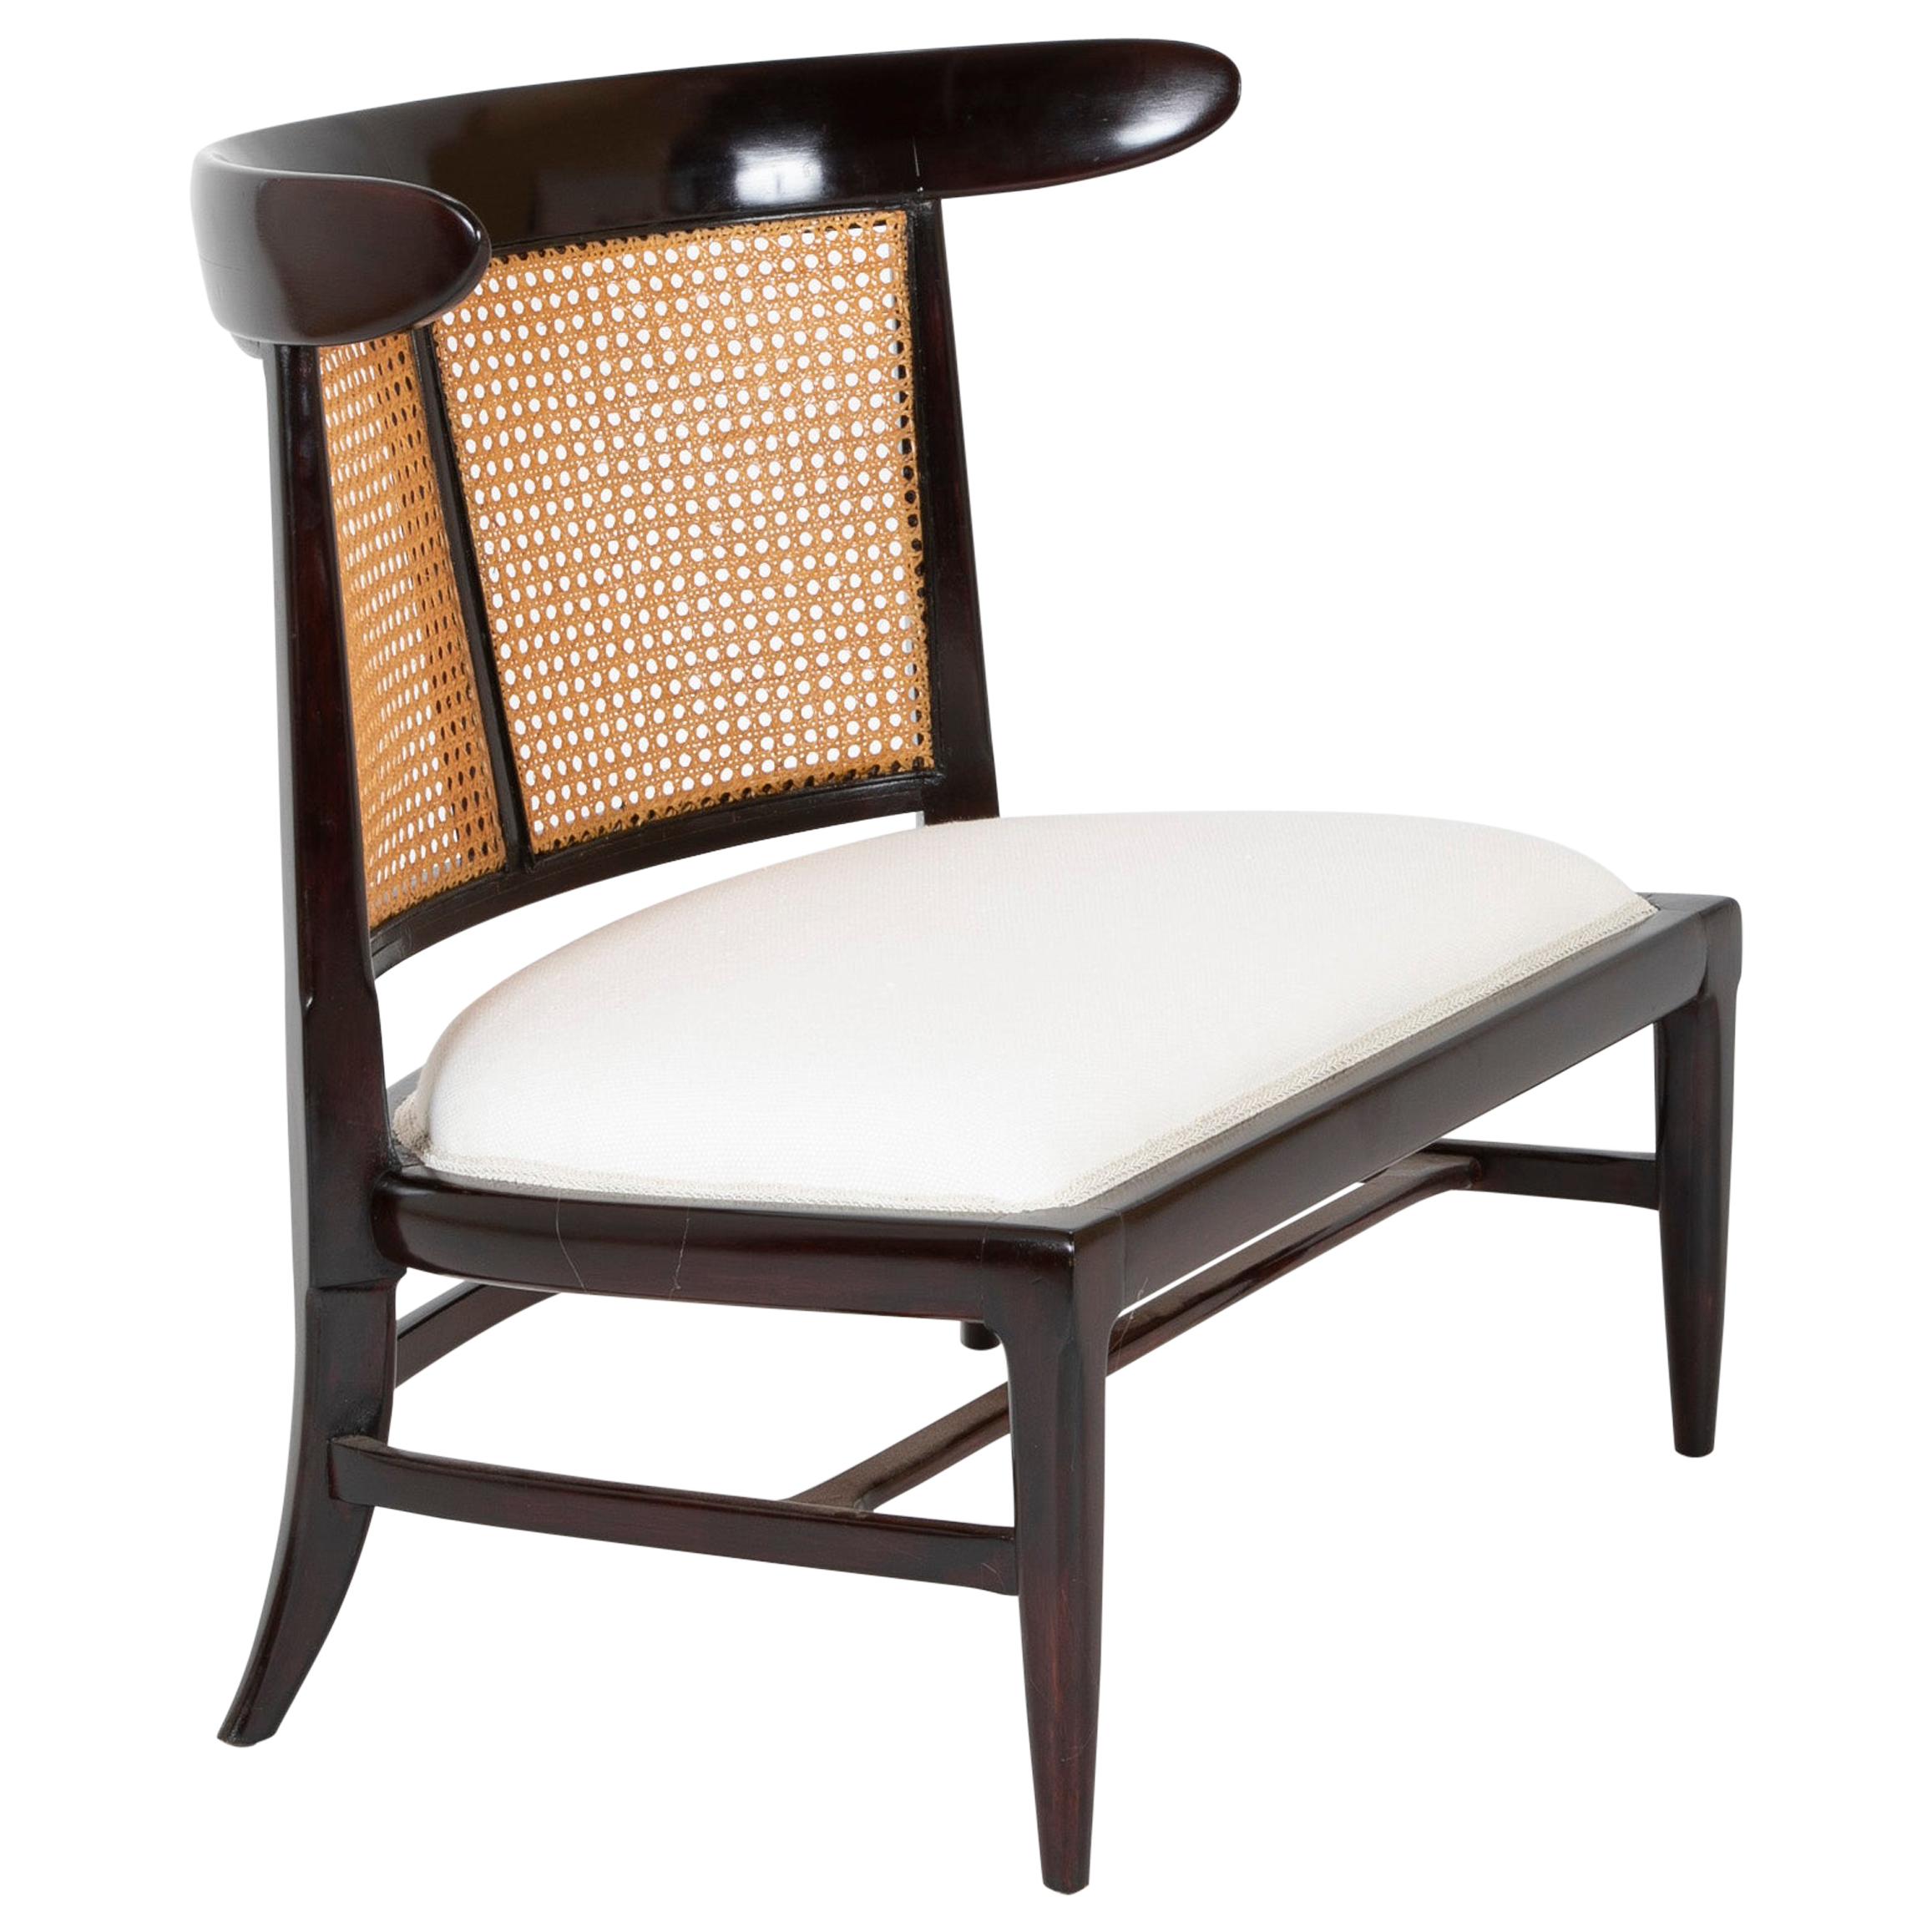 Tomlinson Slipper Lounge Chair with Walnut Frame and Caned Back